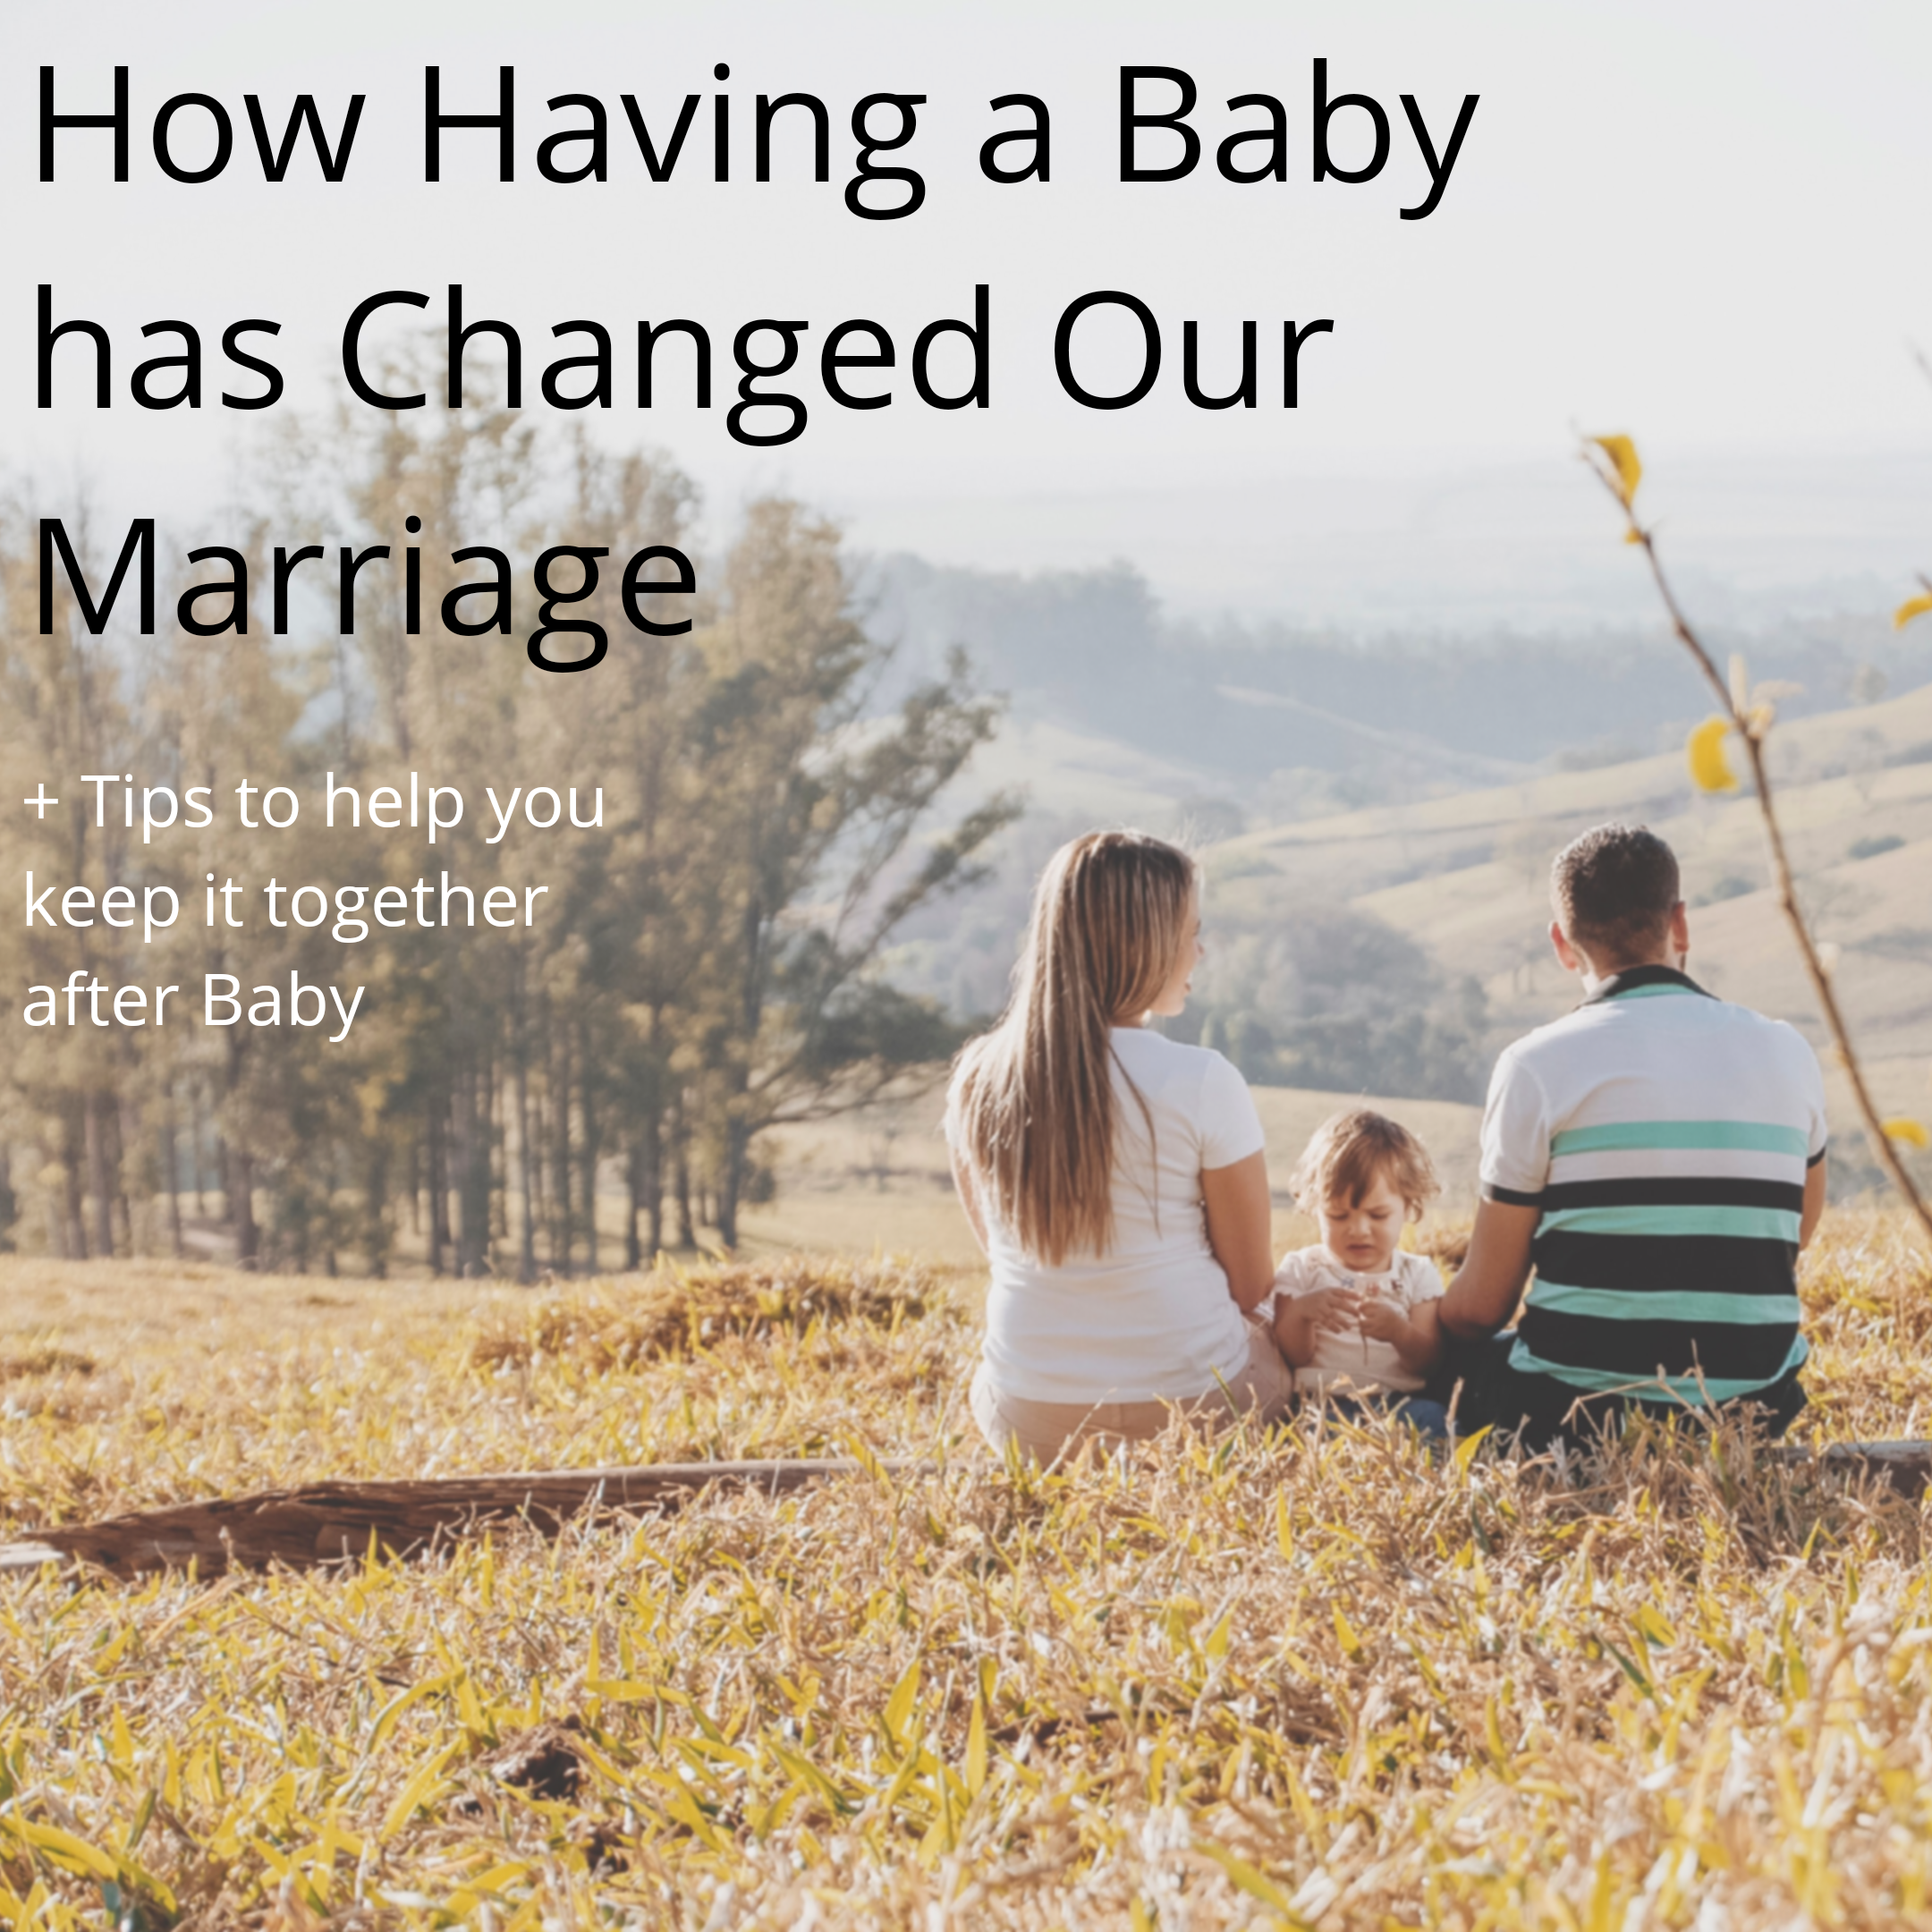 How having a baby changed our marriage plus marriage advice